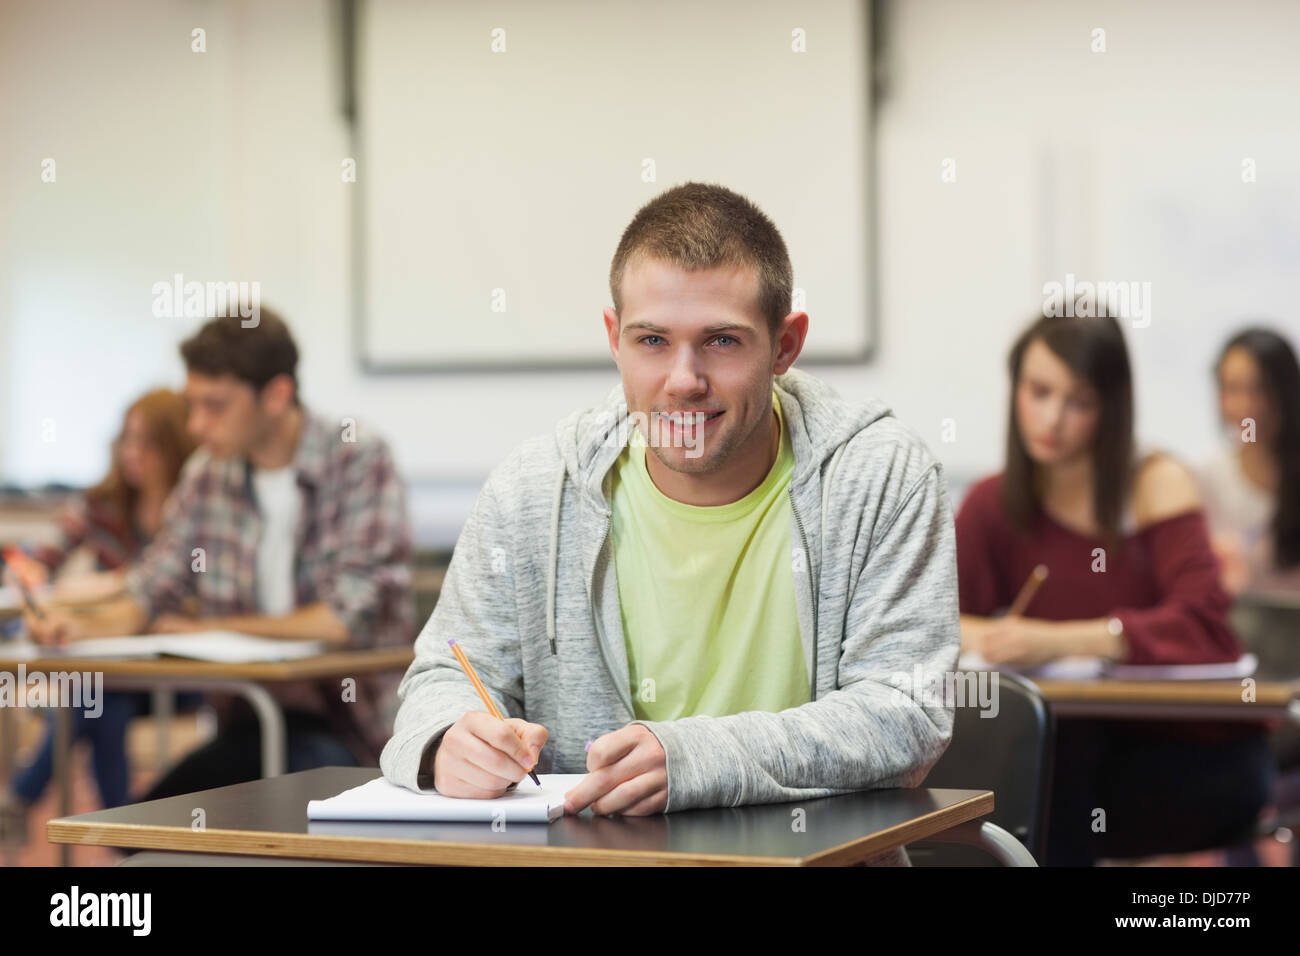 Focused happy student taking notes in class Stock Photo